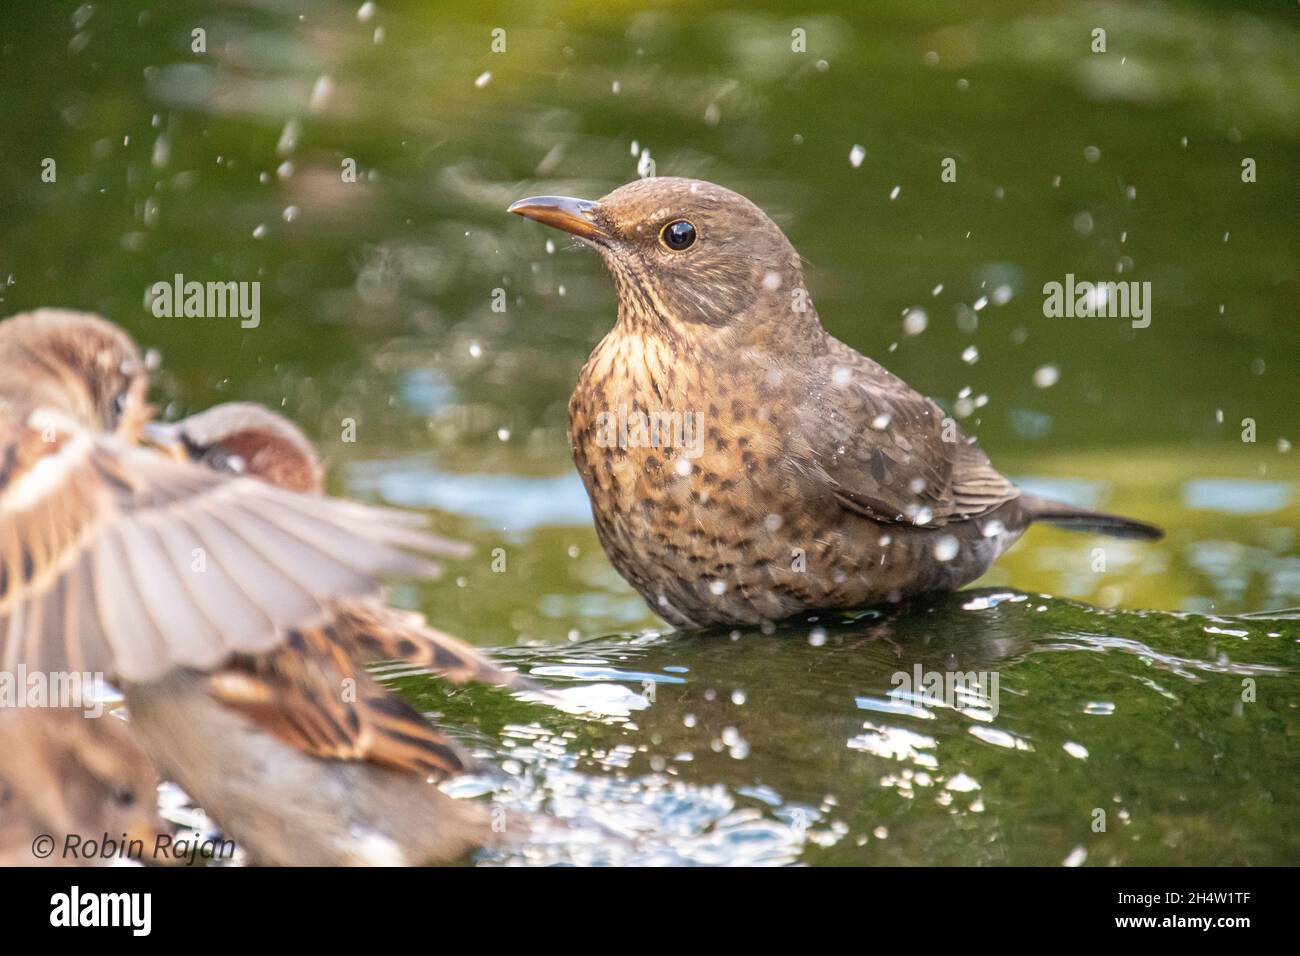 Sparrows in the water, other sparrows splashing water on it Stock Photo